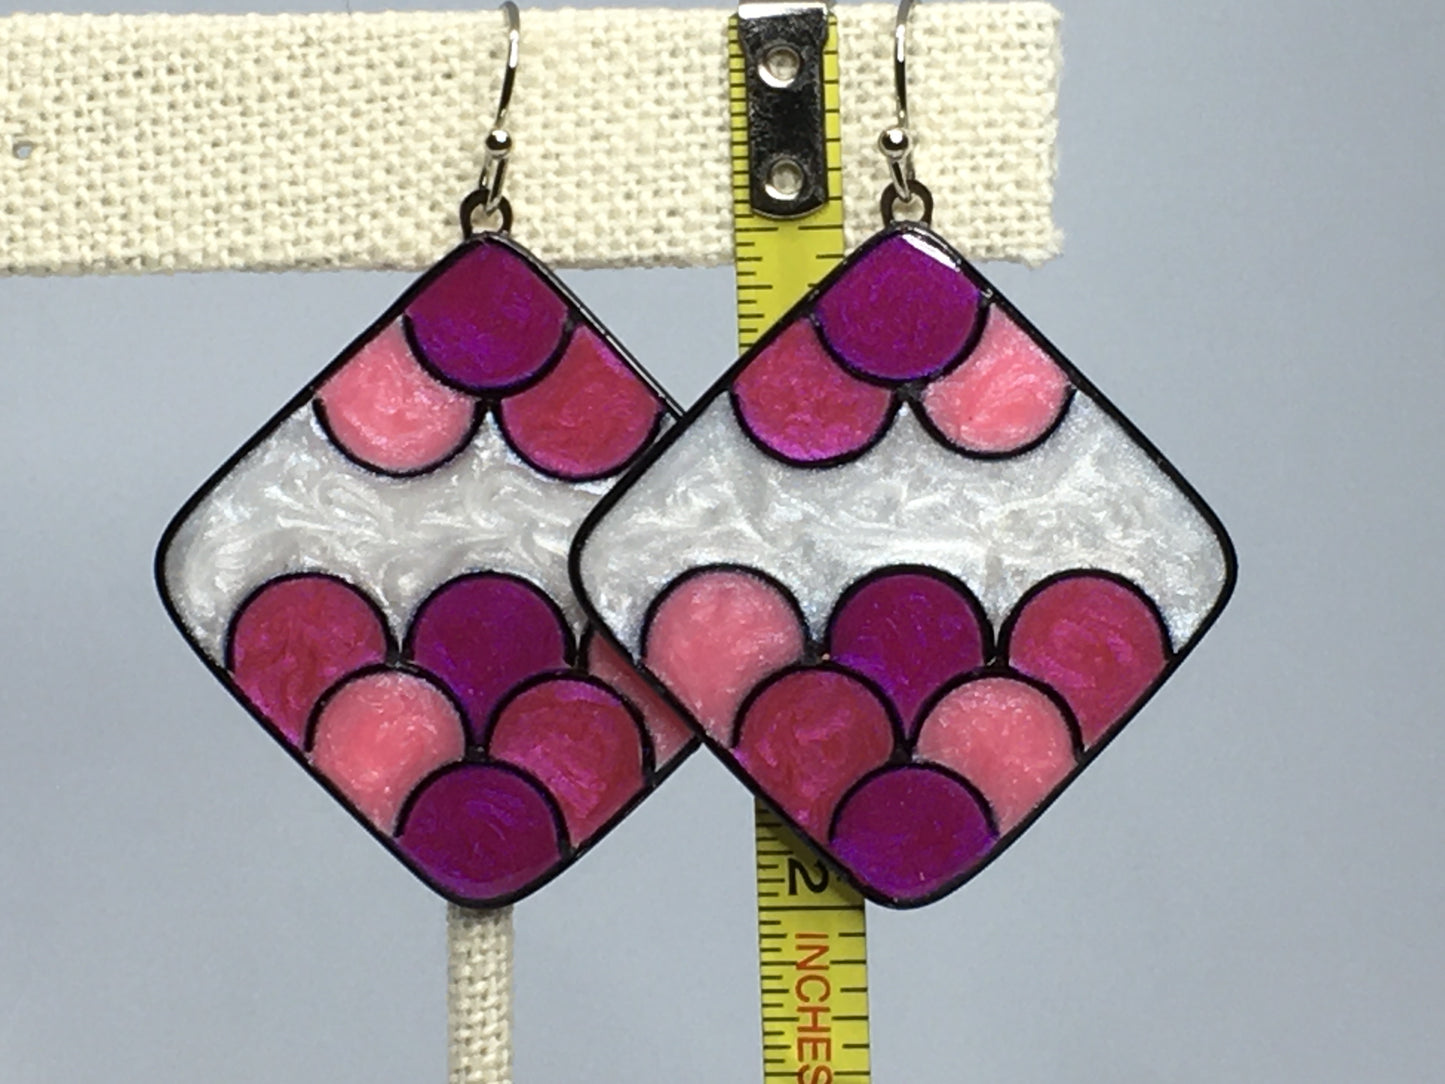 Pink and white earrings